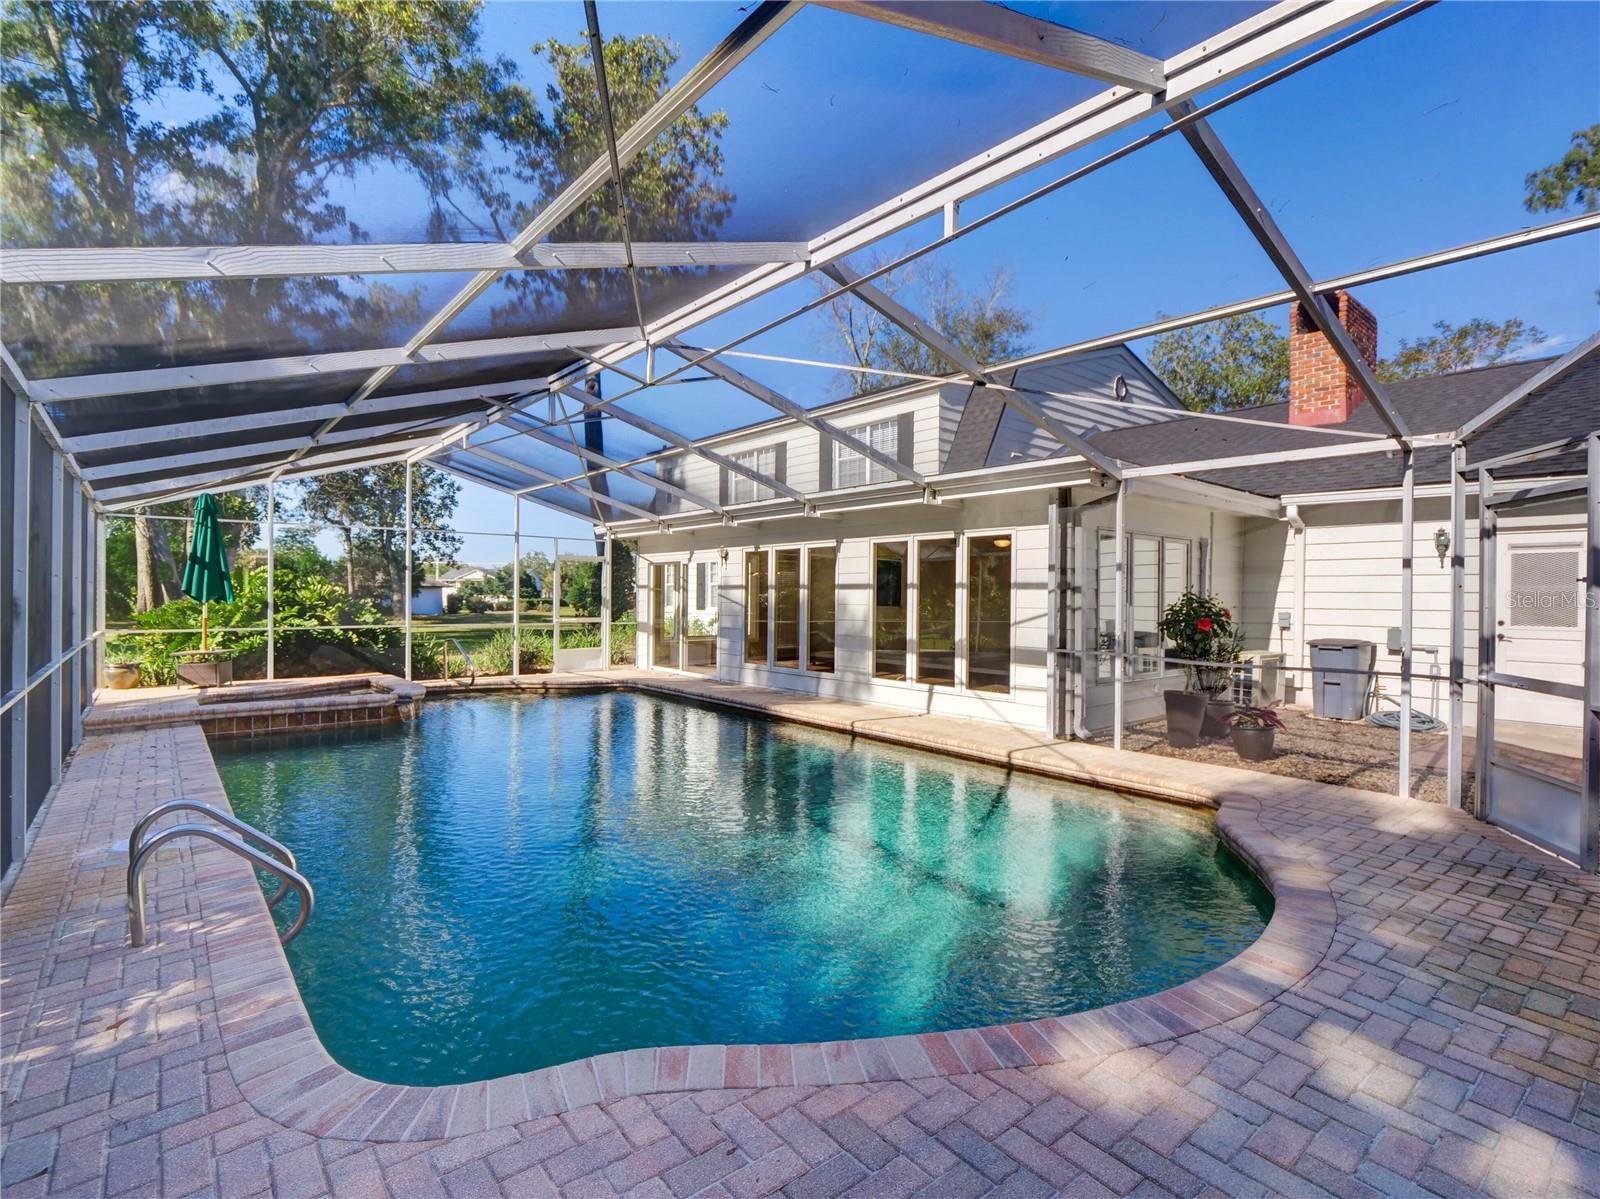 pool in enclosed patio off back of white painted home